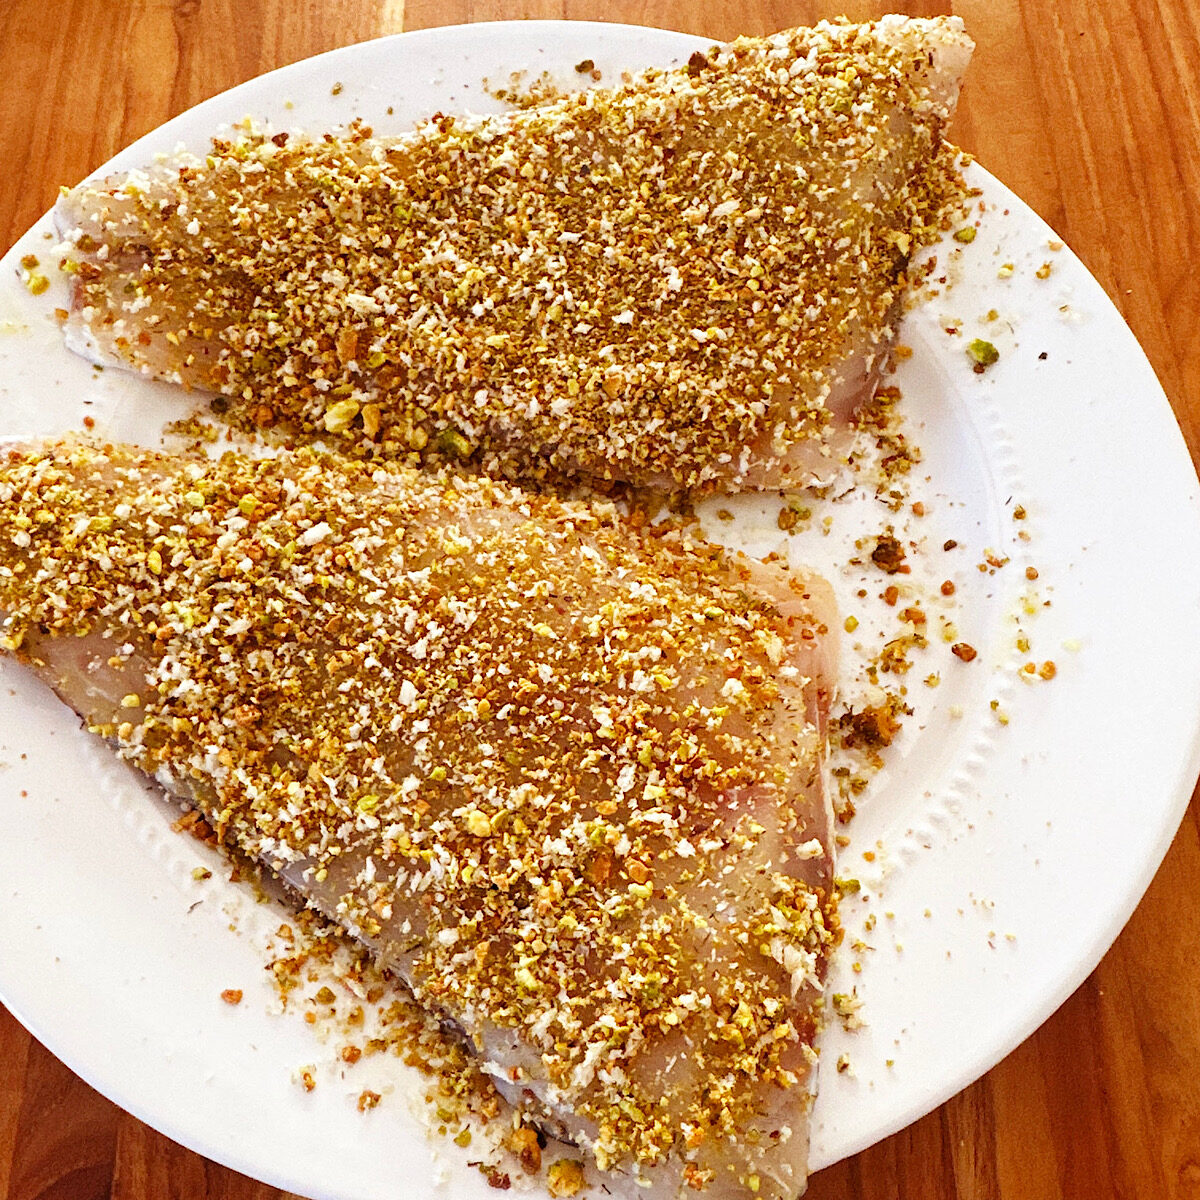 2 large red snapper filets coated with a pistachio nut crust.